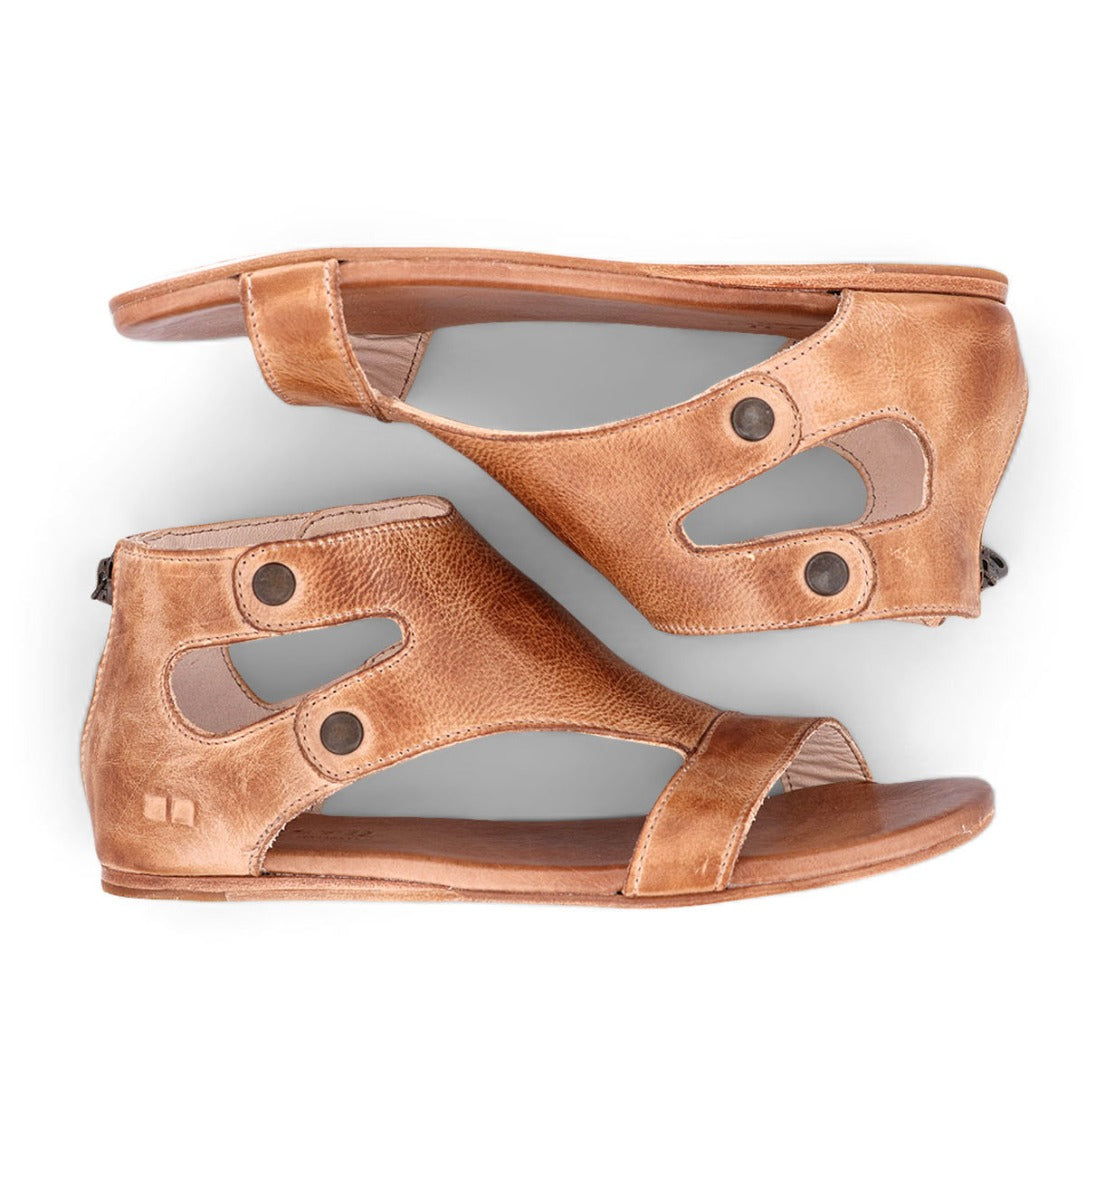 A pair of Bed Stu women's Soto sandals in tan leather.